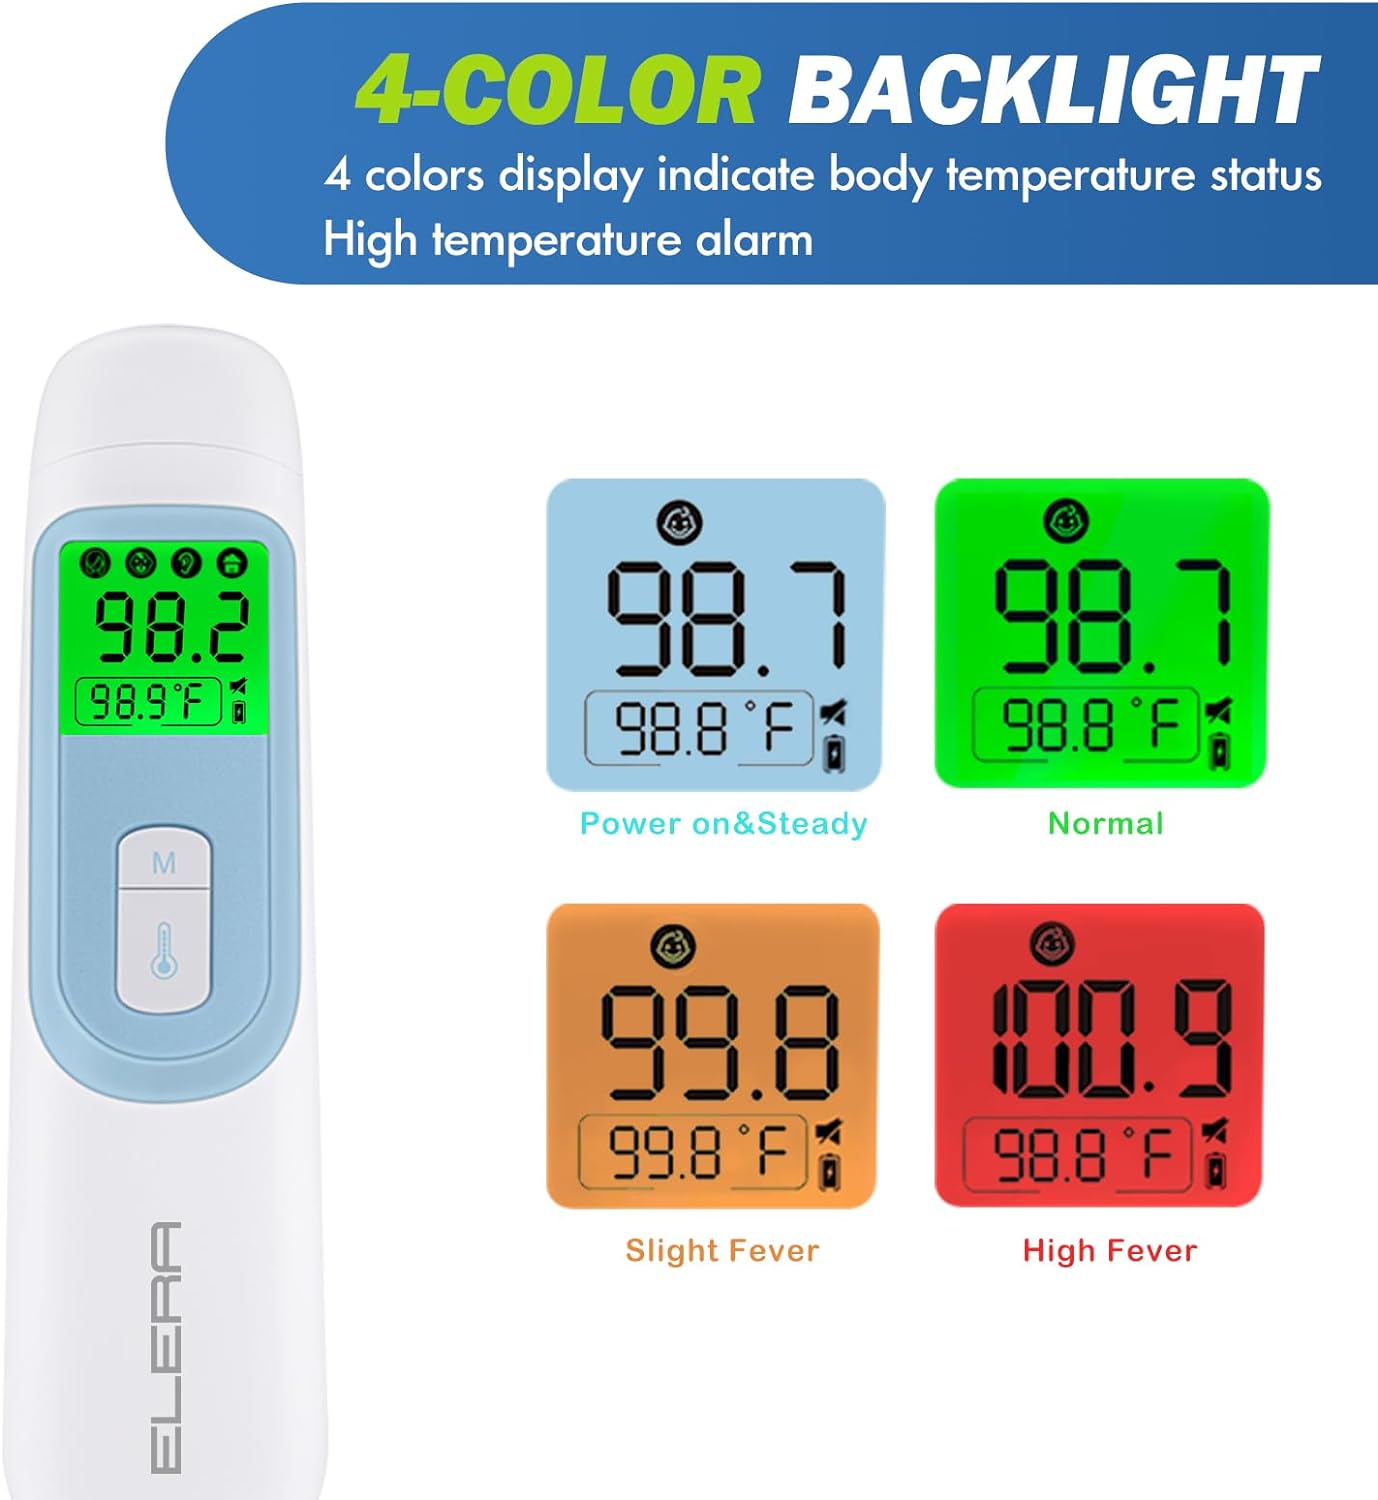 Ear Thermometer for Baby, ELERA Infrared LCD Thermometer with Automatic Switching Mode of Ear & Forehead, 1s Measurement, 4 Color Backlight Display with Fever Indicator : Baby